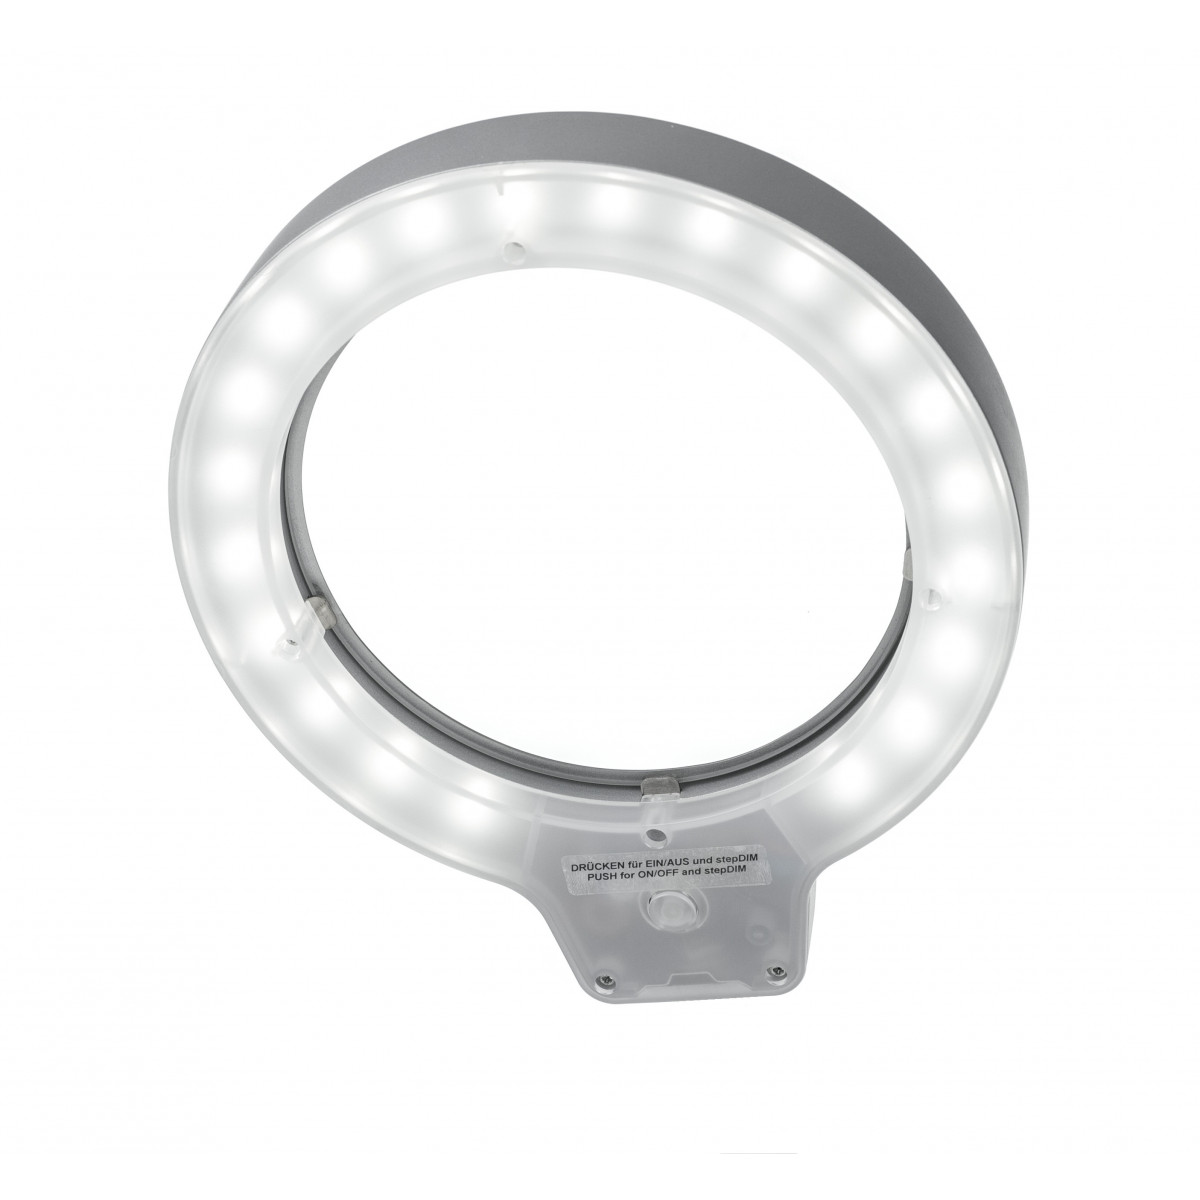 Dimensions: 380 mm x 415 mm, Variation:Ring magnifier lamp 3 diopter